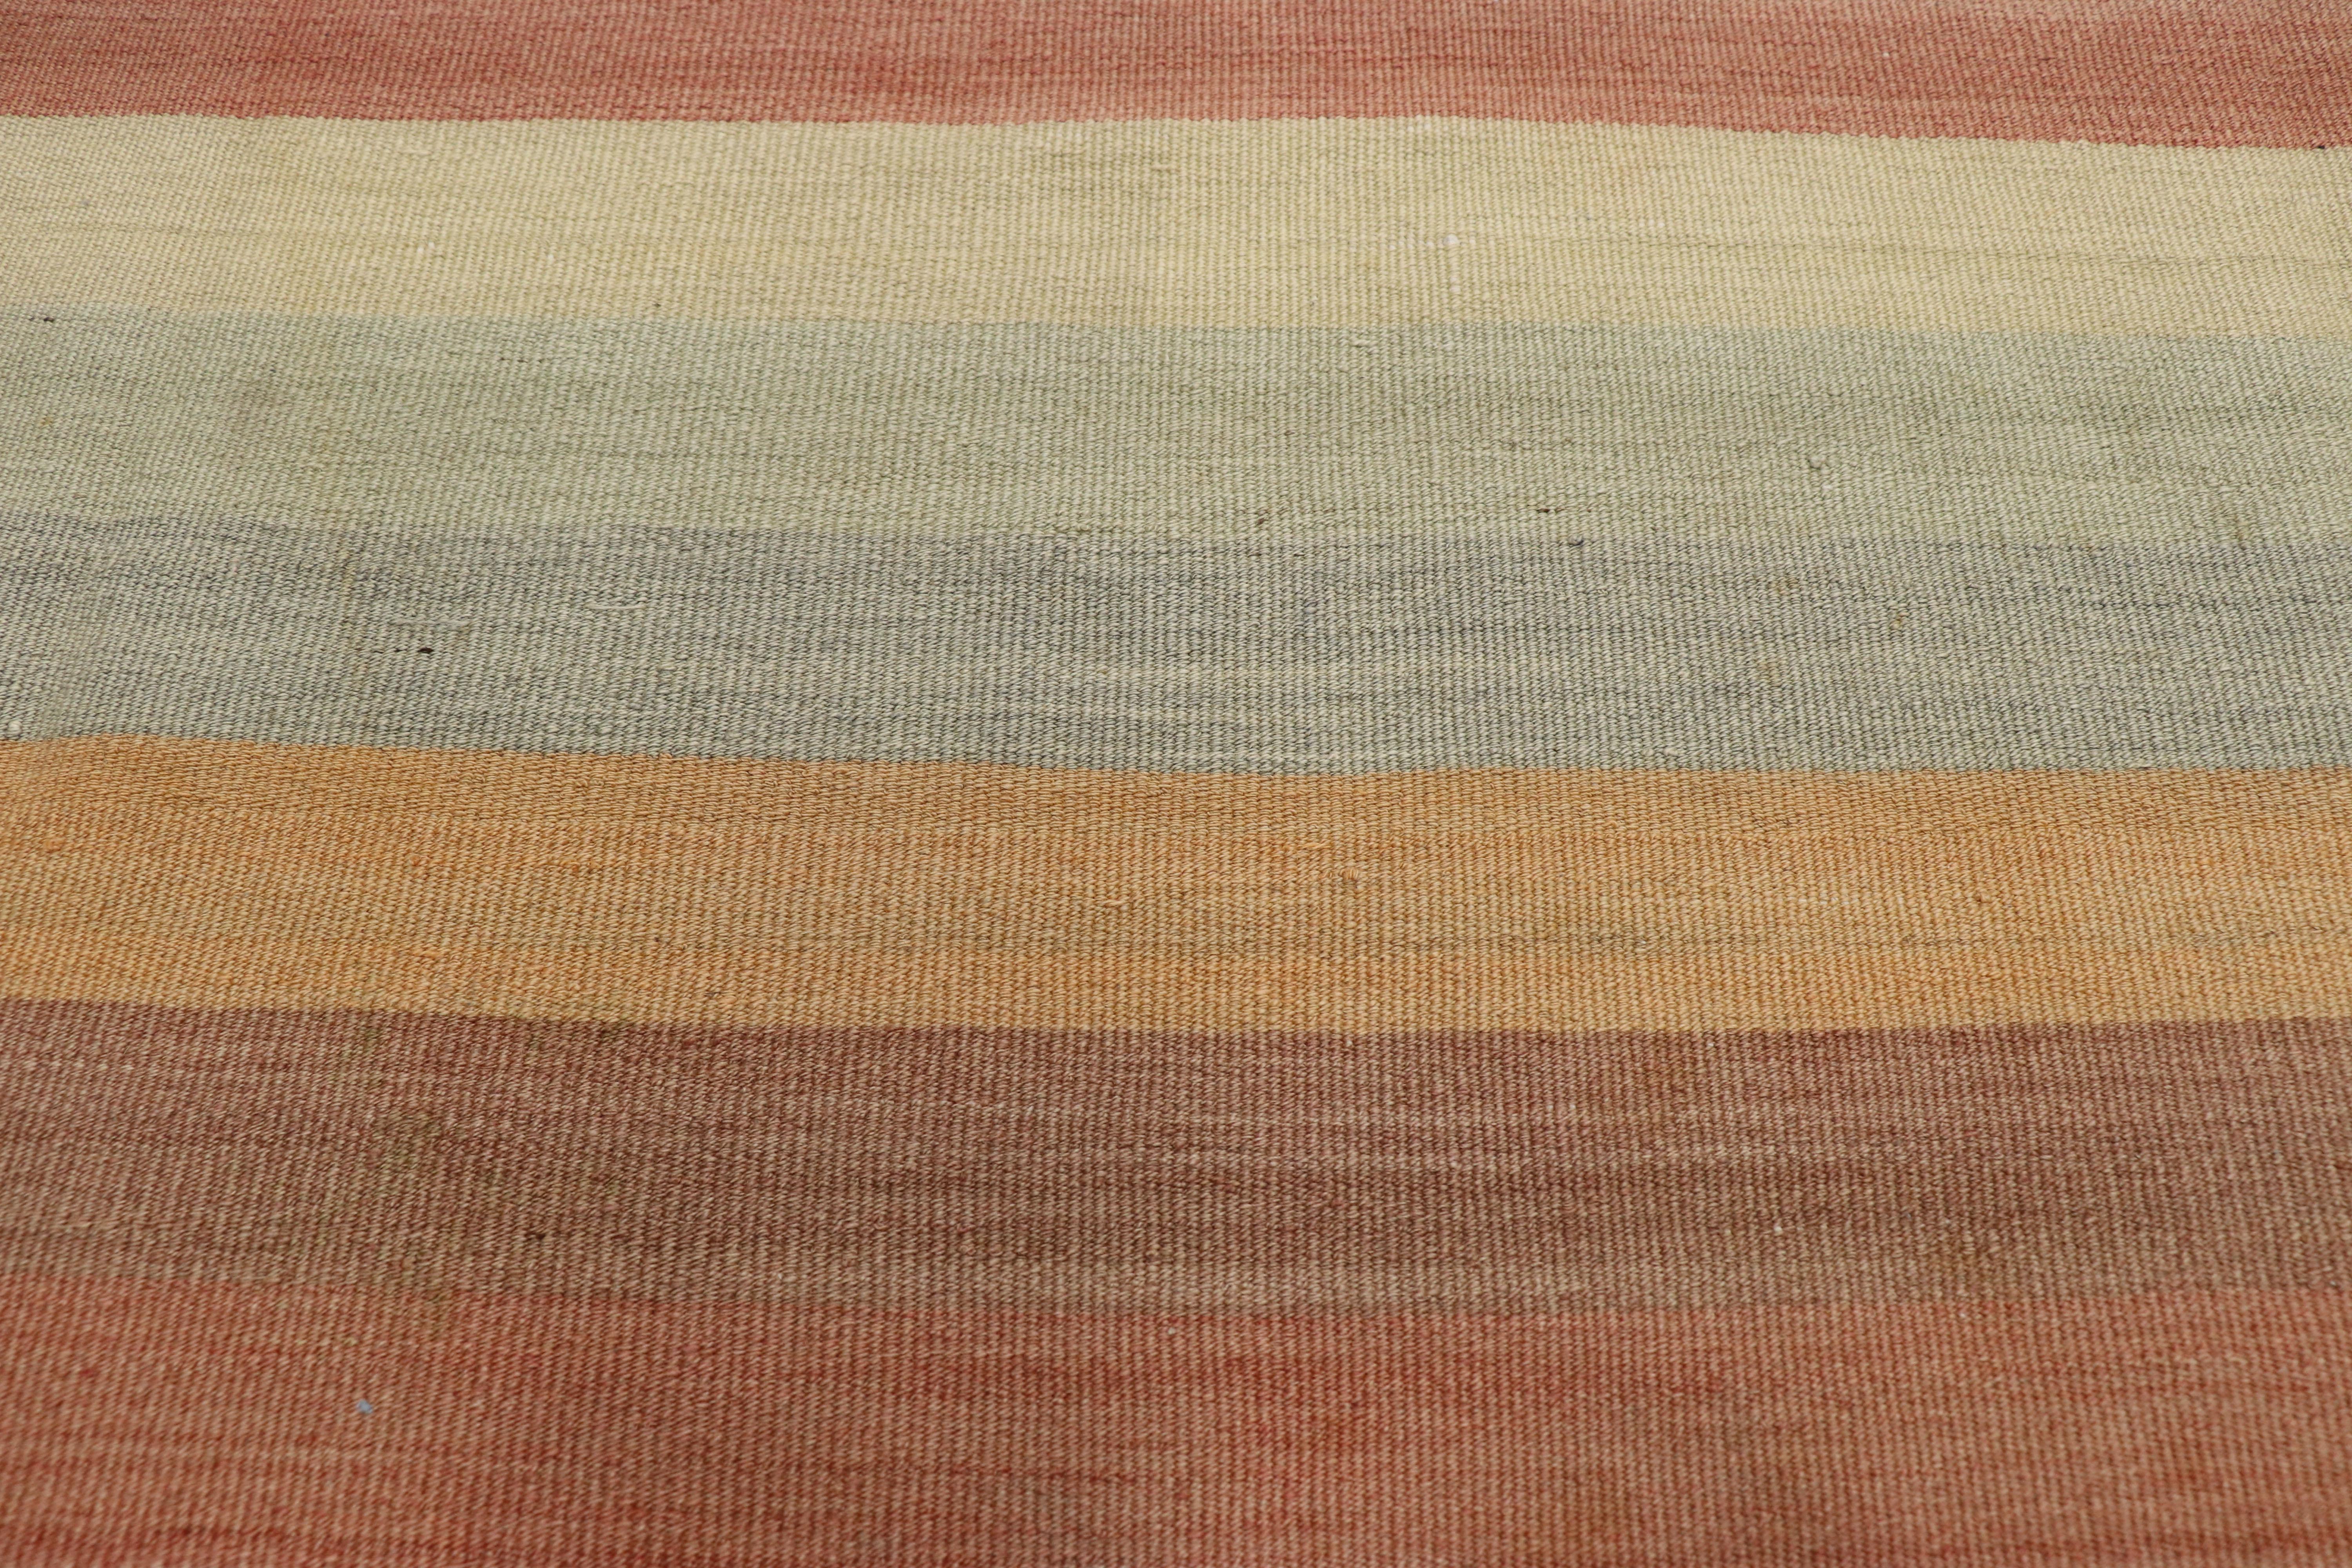 20th Century Vintage Turkish Striped Kilim Rug with Soft Colors, Flat-Weave Rug